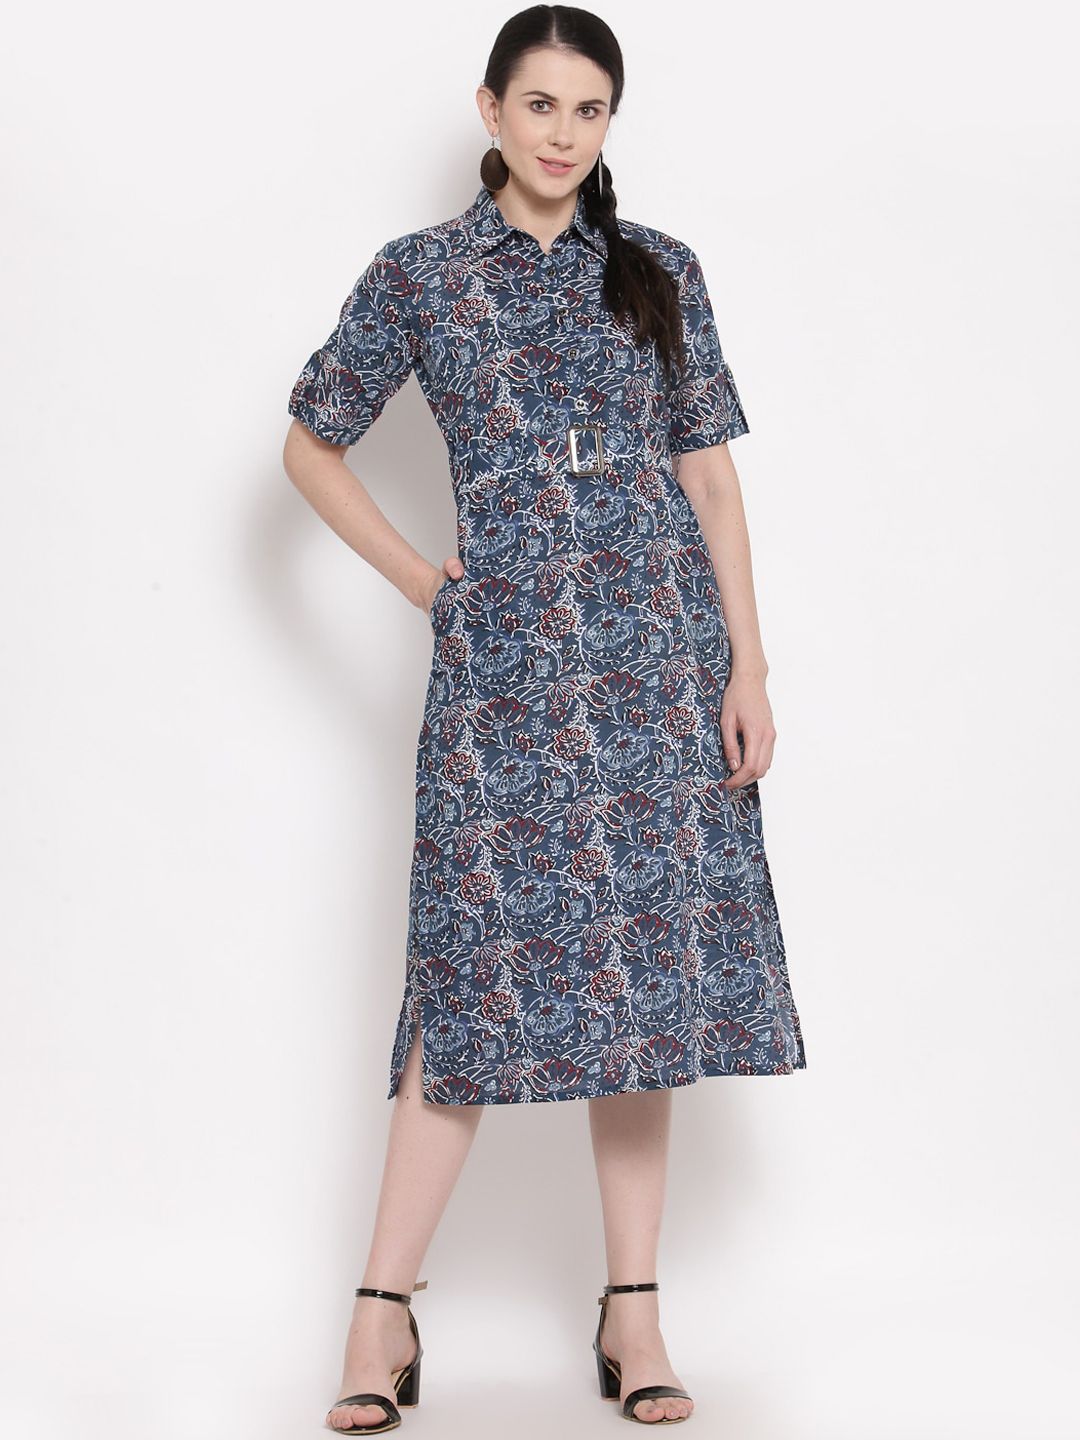 Indibelle Blue & Maroon Floral Cotton Shirt Dress Price in India